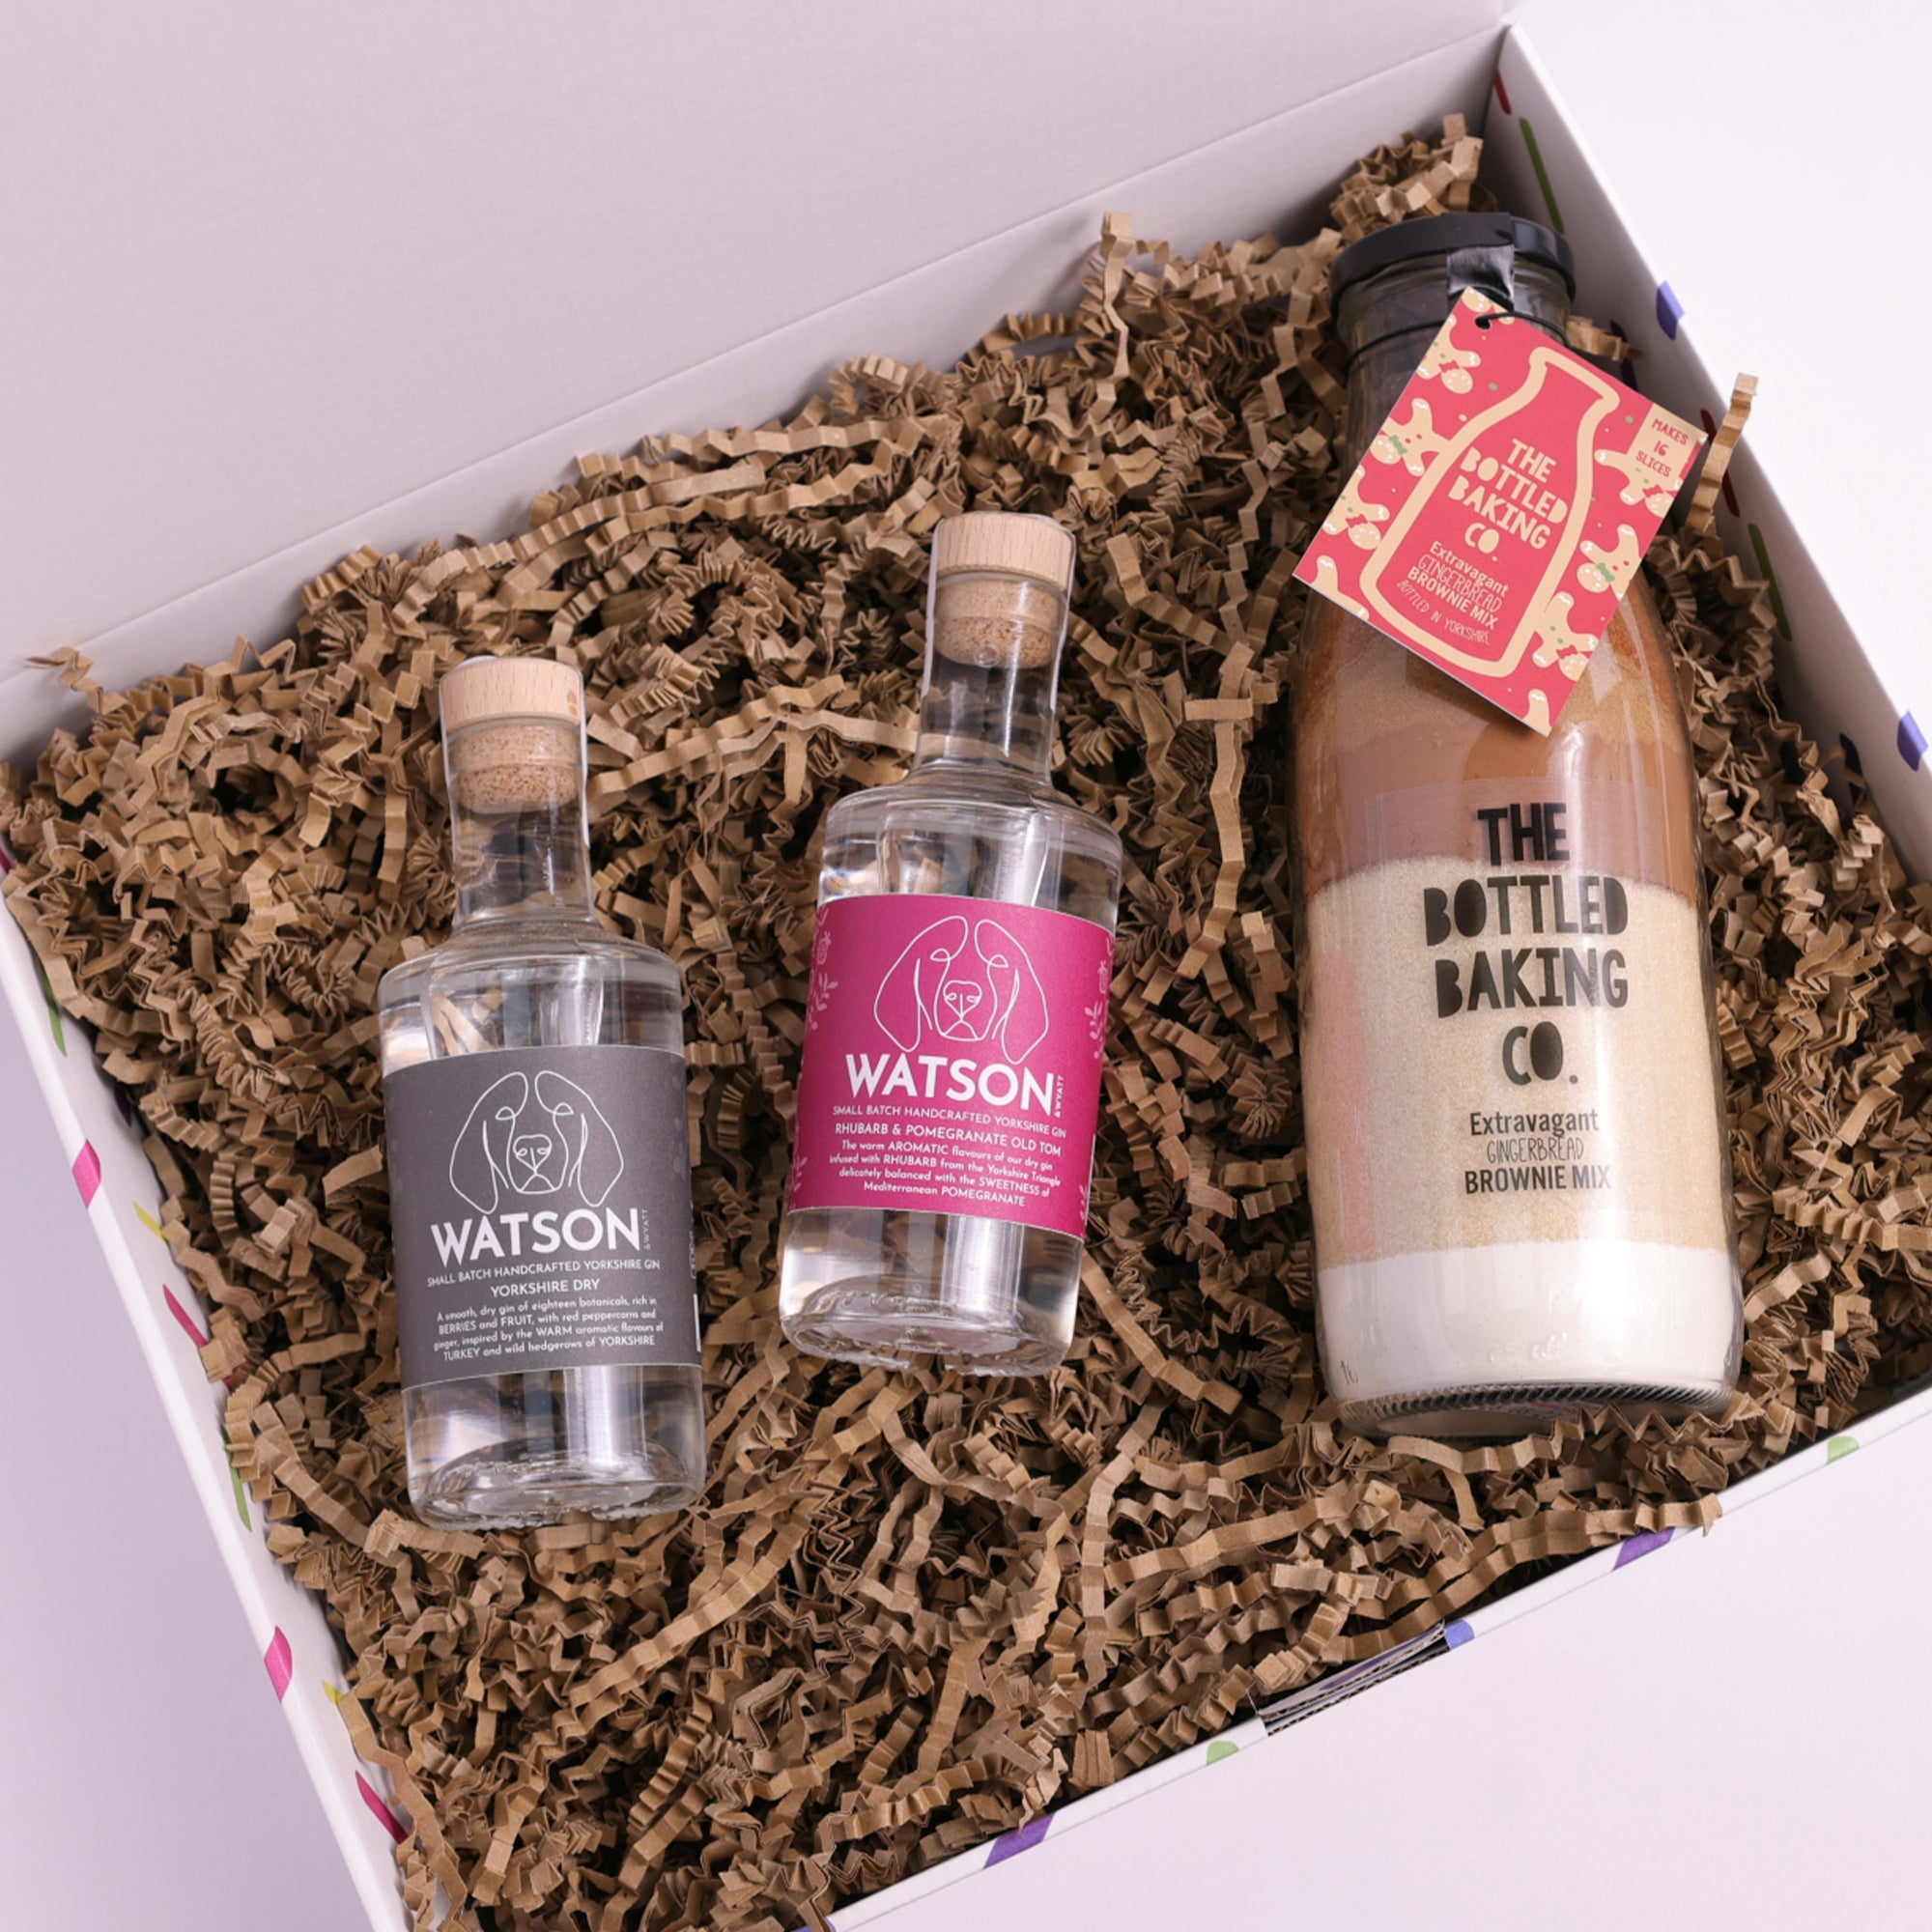 Watson's Gin and Gingerbread Brownie Gift Box